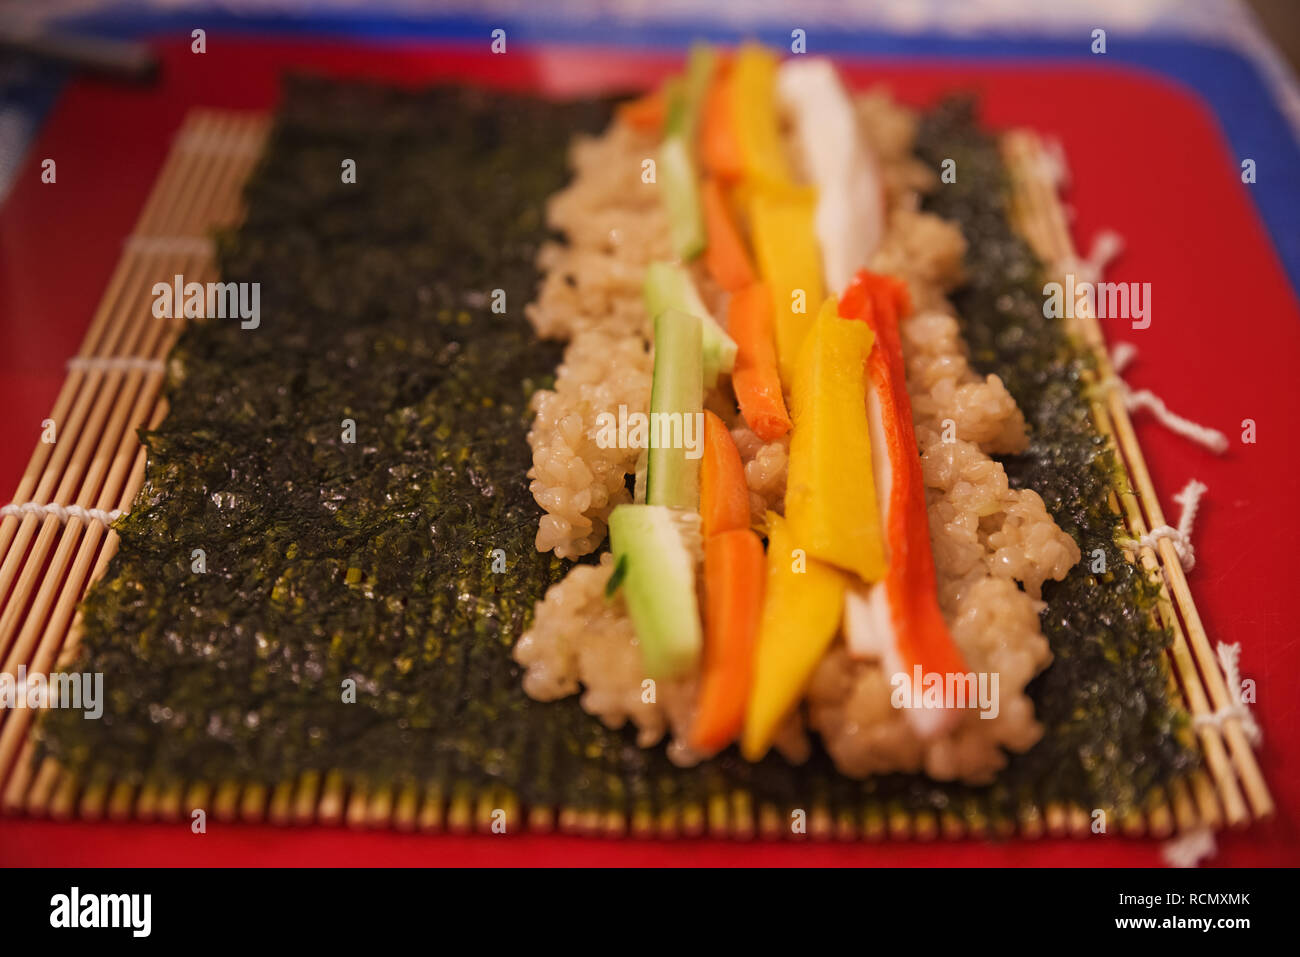 making a homemade sushi roll with immitation crab mango carrot cucumber rice and nori ready to roll Stock Photo